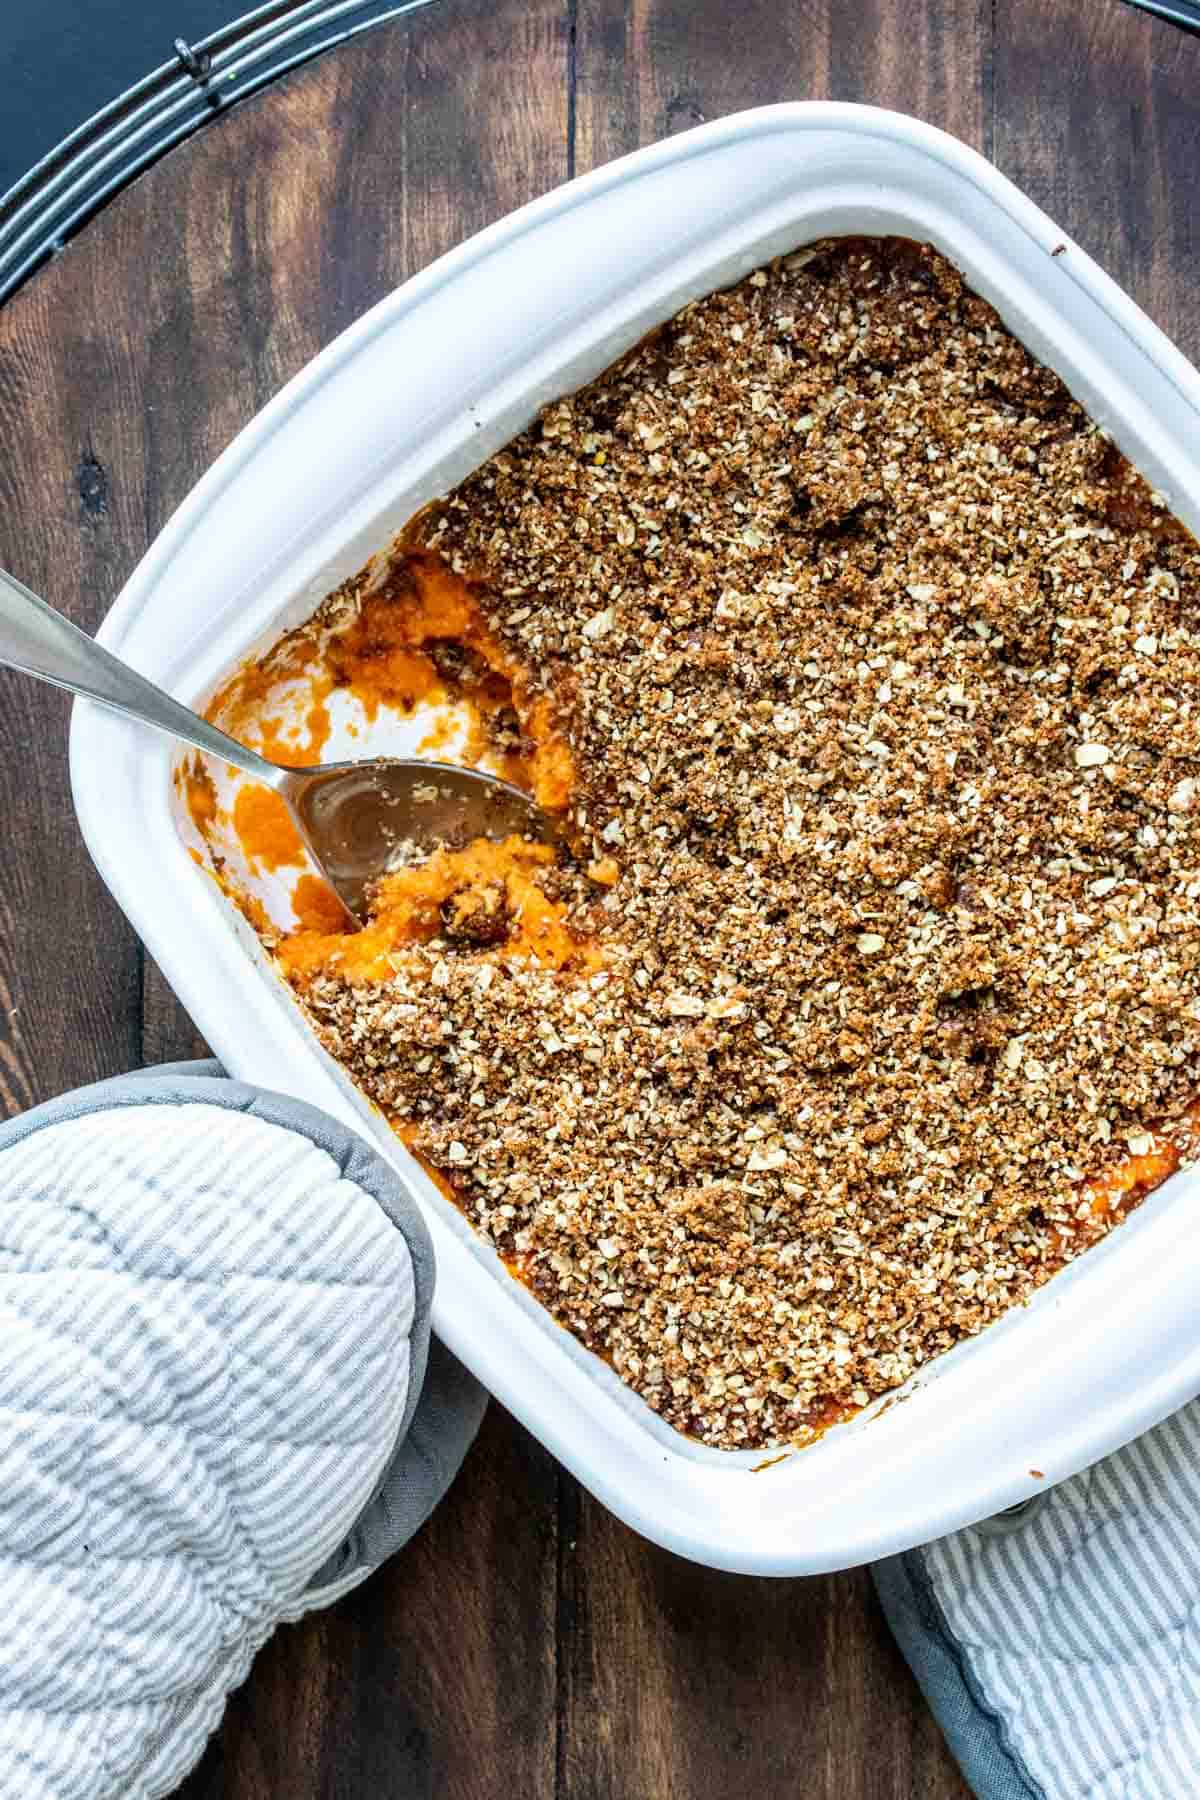 Spoon serving a baked sweet potato casserole in a white dish.